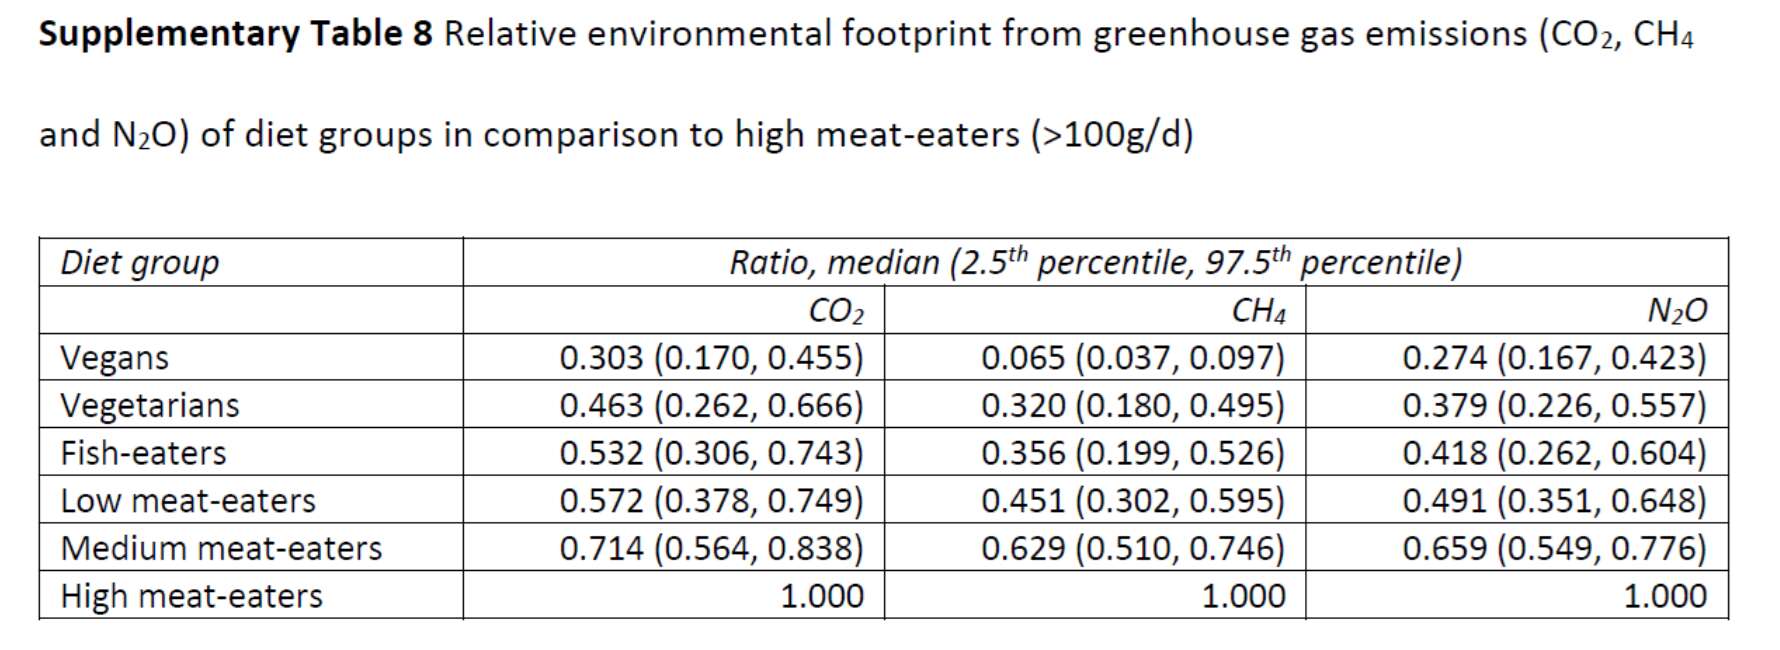 Supplementary Information, Scarborough, P., Clark, M., Cobiac, L. et al. Vegans, vegetarians, fish-eaters and meat-eaters in the UK show discrepant environmental impacts. Nat Food 4, 565–574 (2023).